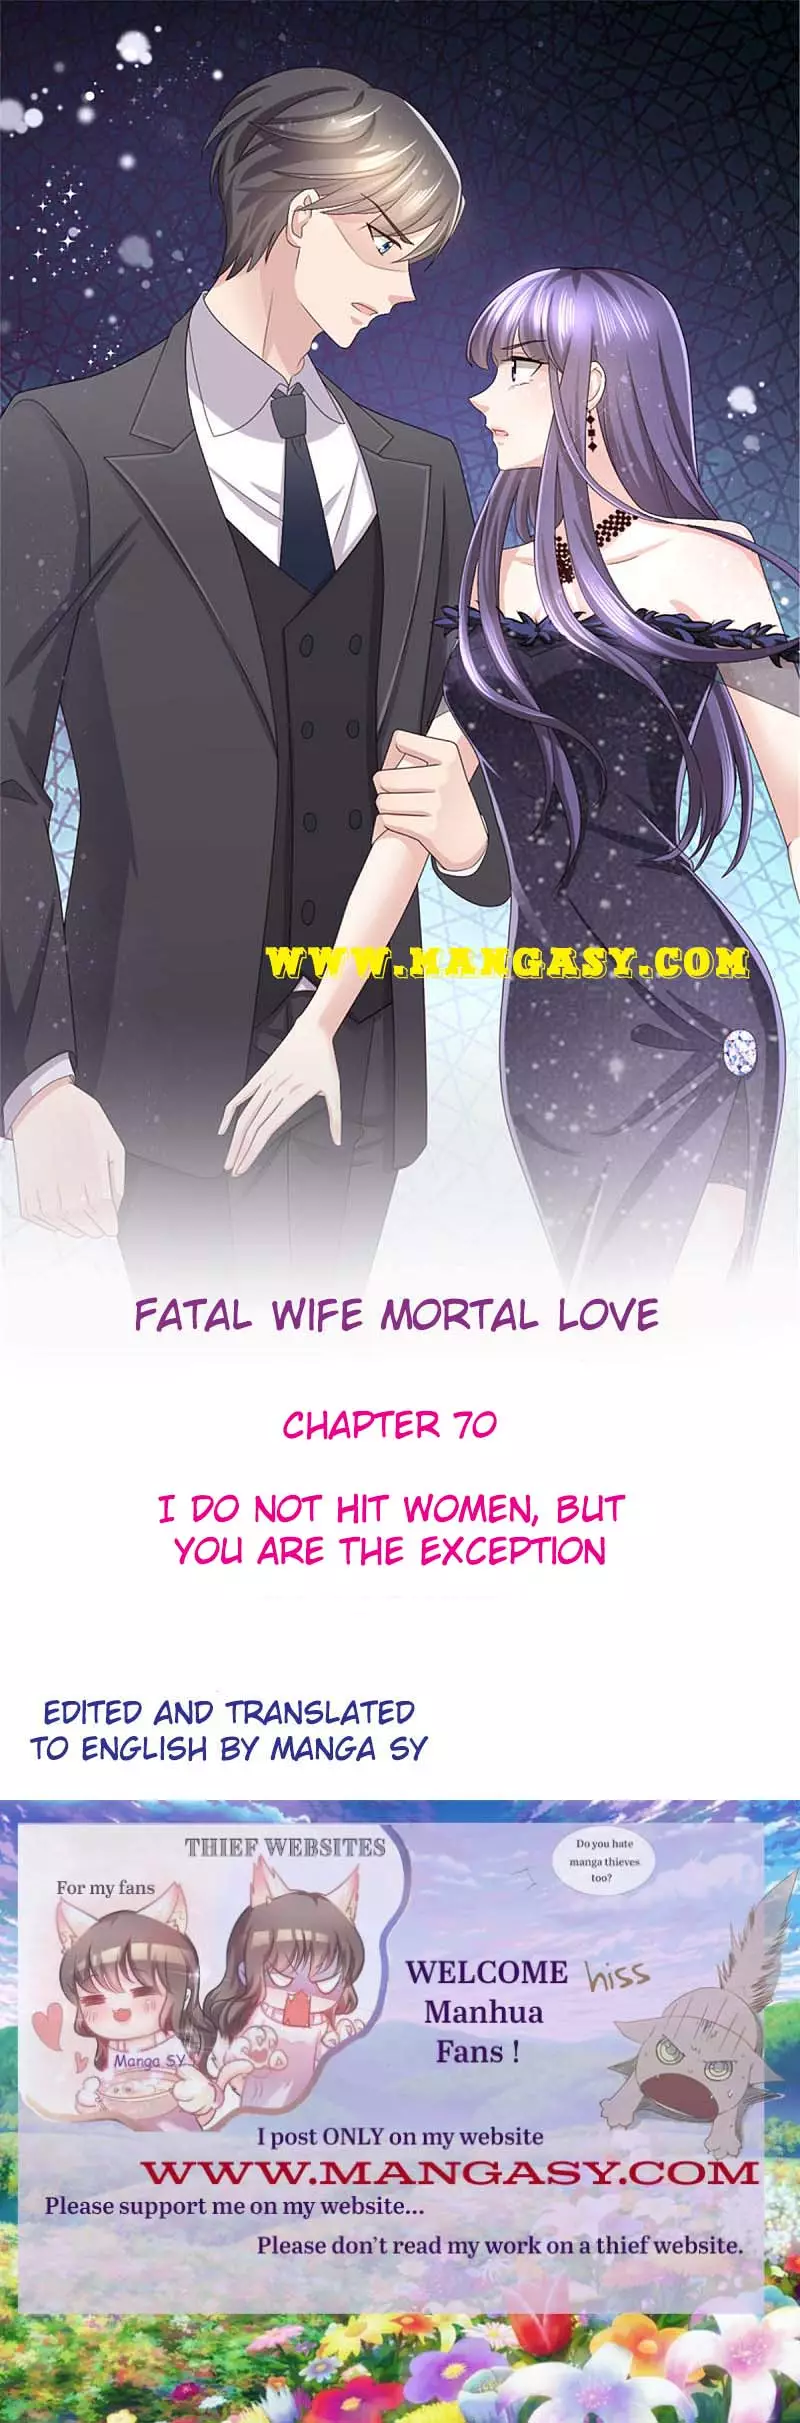 A Deadly Sexy Wife: The Ceo Wants To Remarry - 70 page 1-61c81657